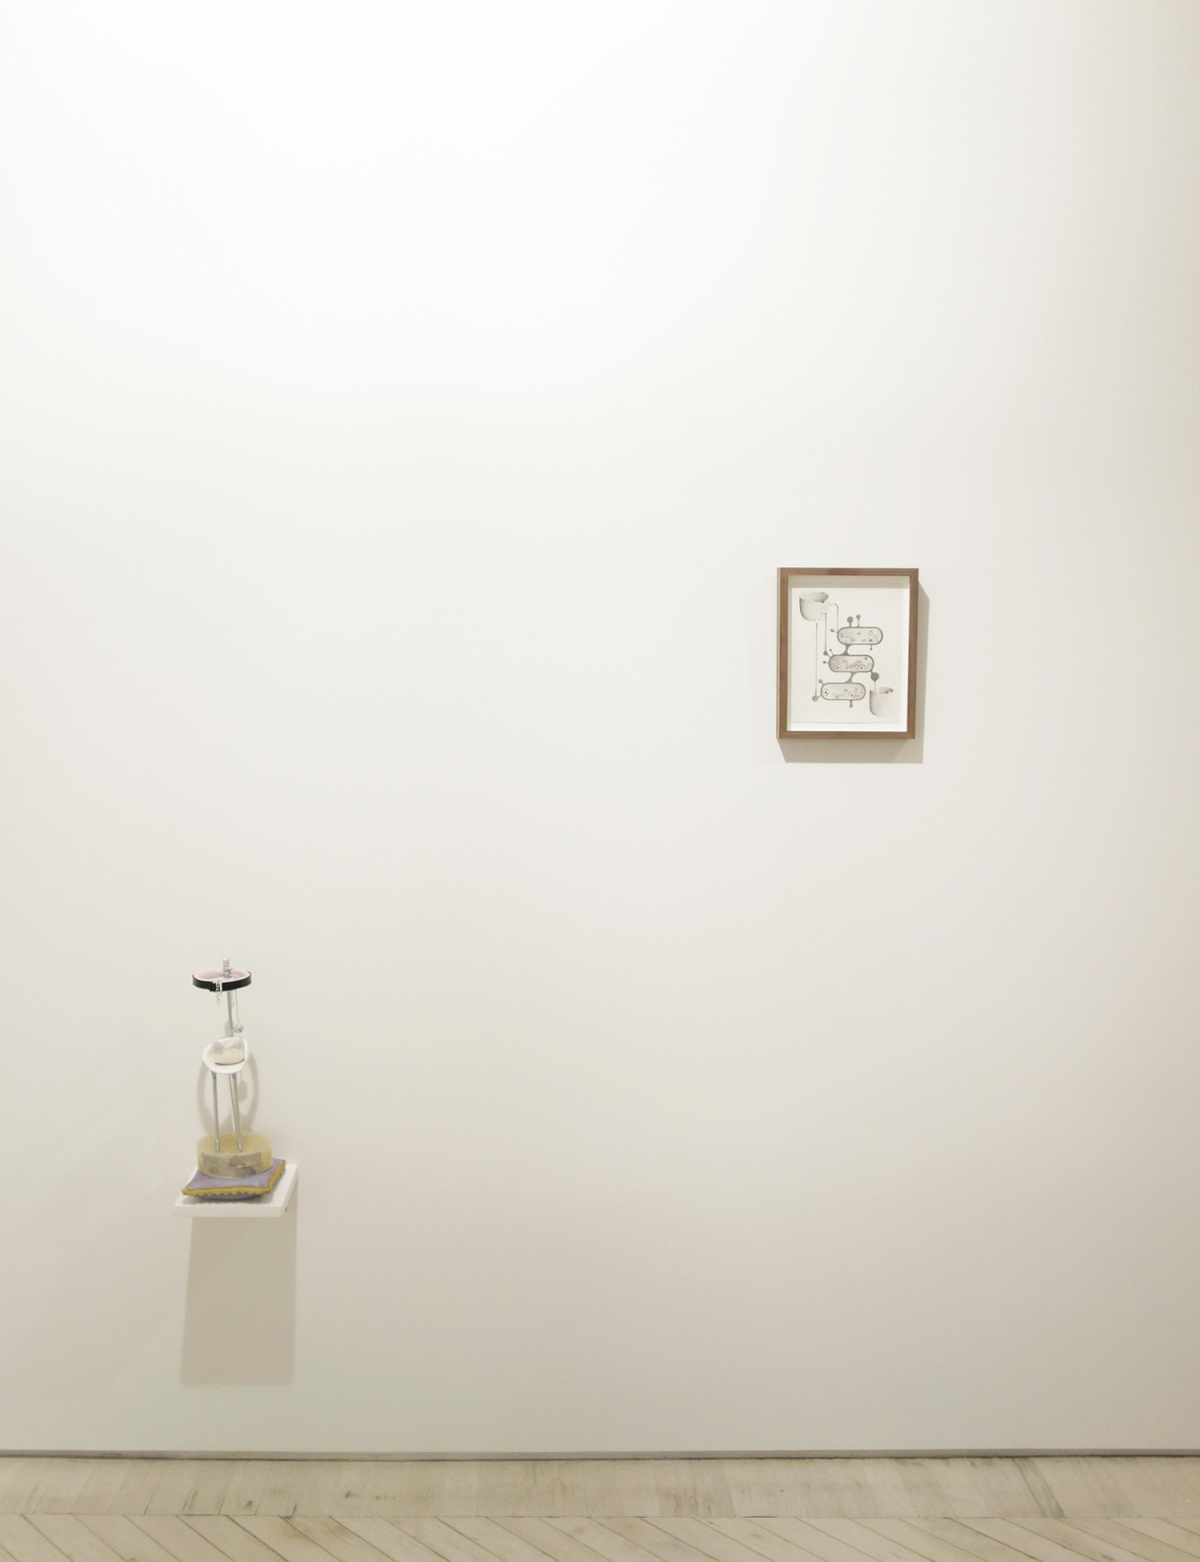 Installation view: Allison Branham, basement huge and white with a thousand tables, 2014; Natasha Ghosn, 2 of Cups, 2013 - small sculpture on a wall shelf and small graphite drawing on the wall.